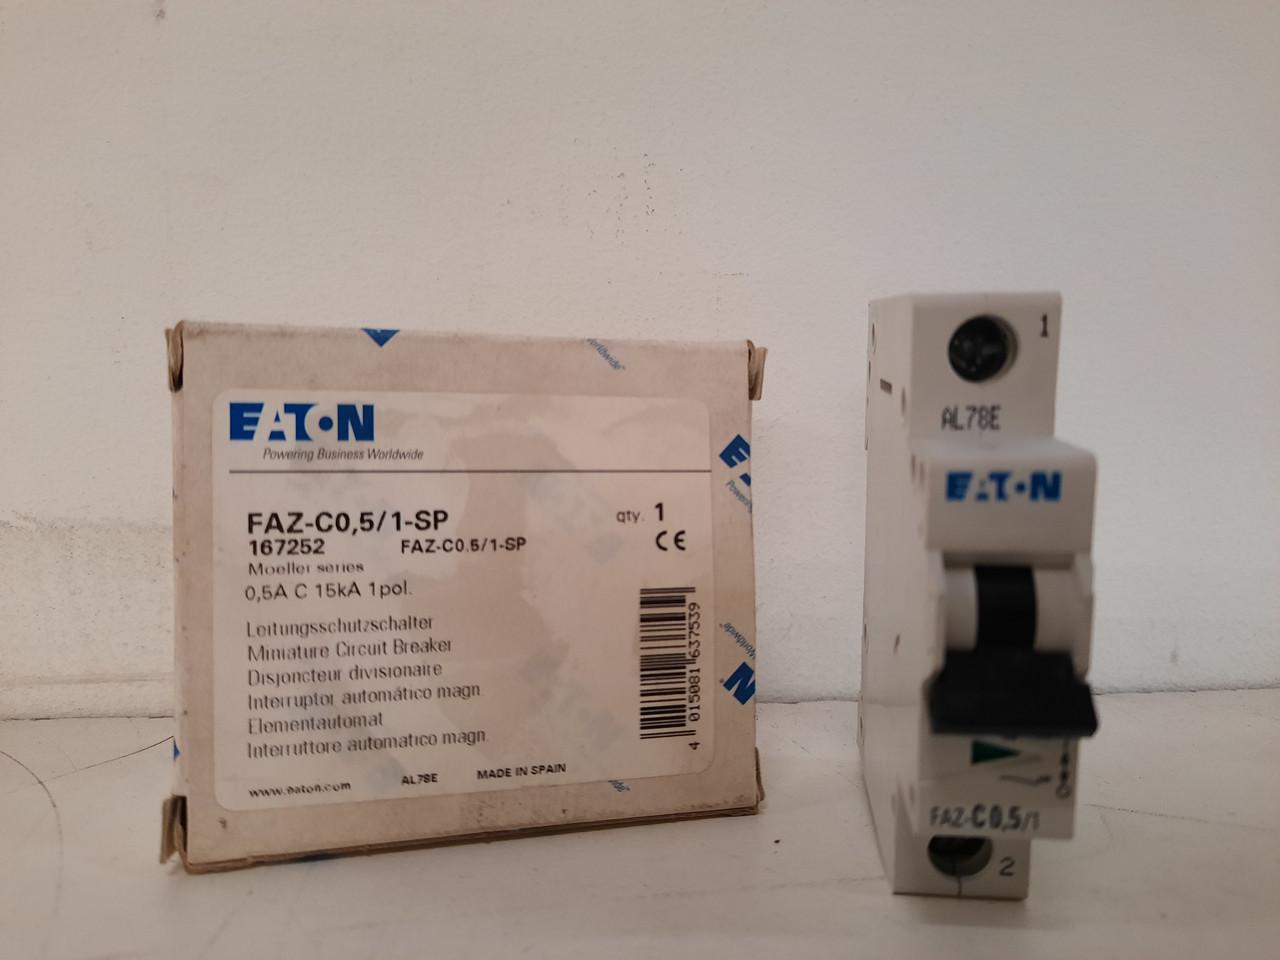 Eaton FAZ-C0.5/1-SP Eaton FAZ supplementary protector,UL 1077 Industrial miniature circuit breaker-supplementary protector,Single package,Medium levels of inrush current are expected,0.5A,15 kAIC,Single-pole,277V,5-10X/n,Q38,50-60 Hz,Standard terminals,C Curve